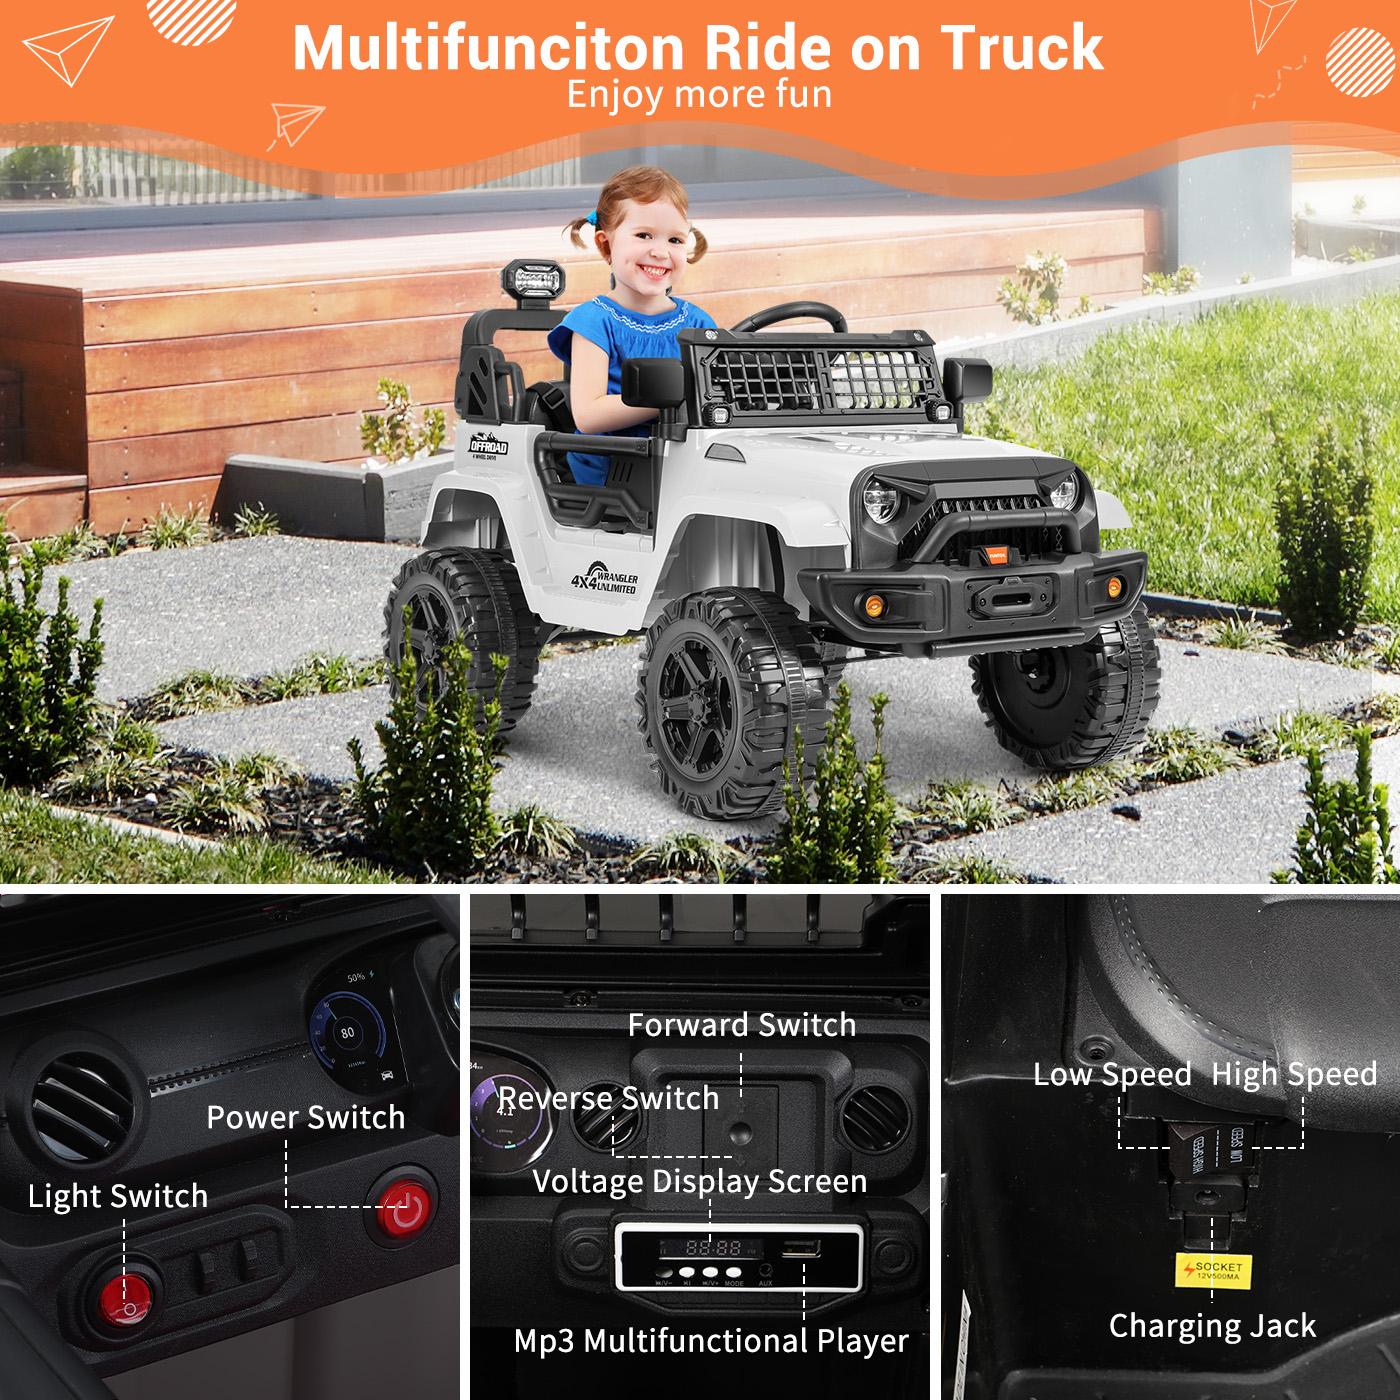 FUNTOK Kids 12V Electric Ride on Truck Toy Car with Remote Control, Spring Suspension, DIY Stickers and Music Player - image 5 of 9